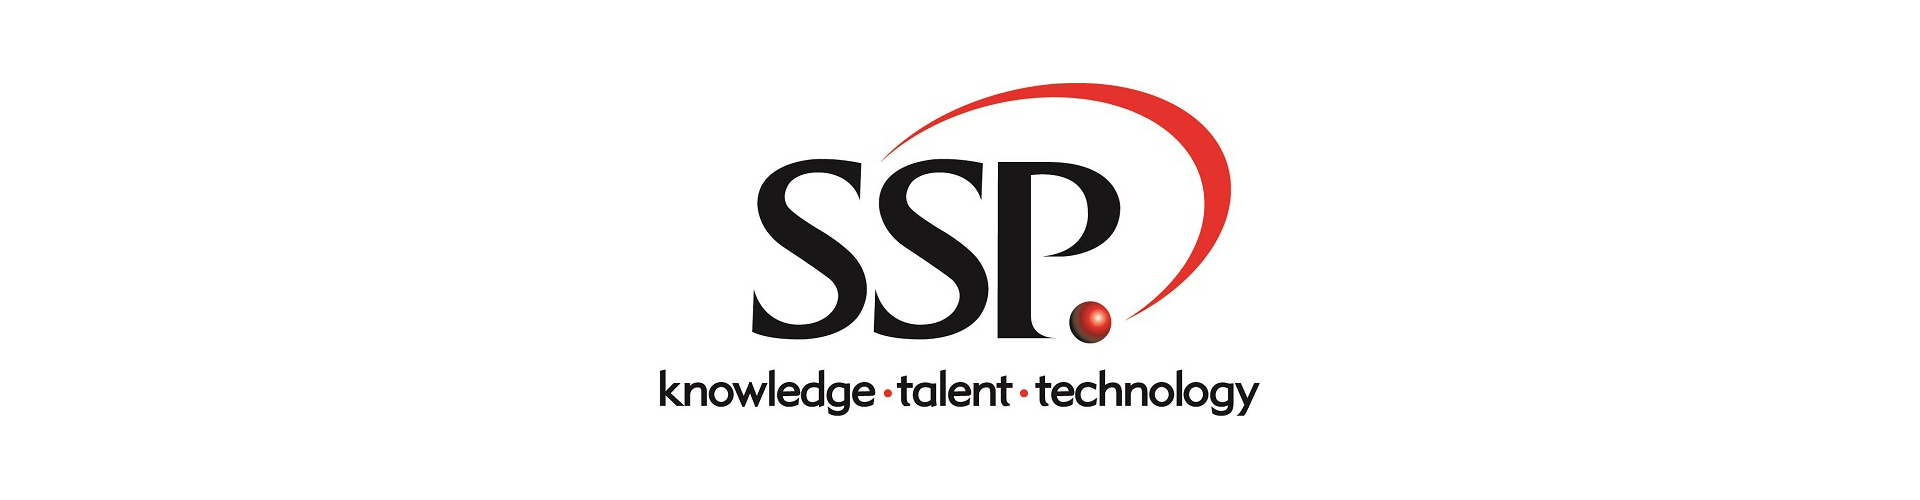 SSP marks transition to software as a service model with new Hood Group deal